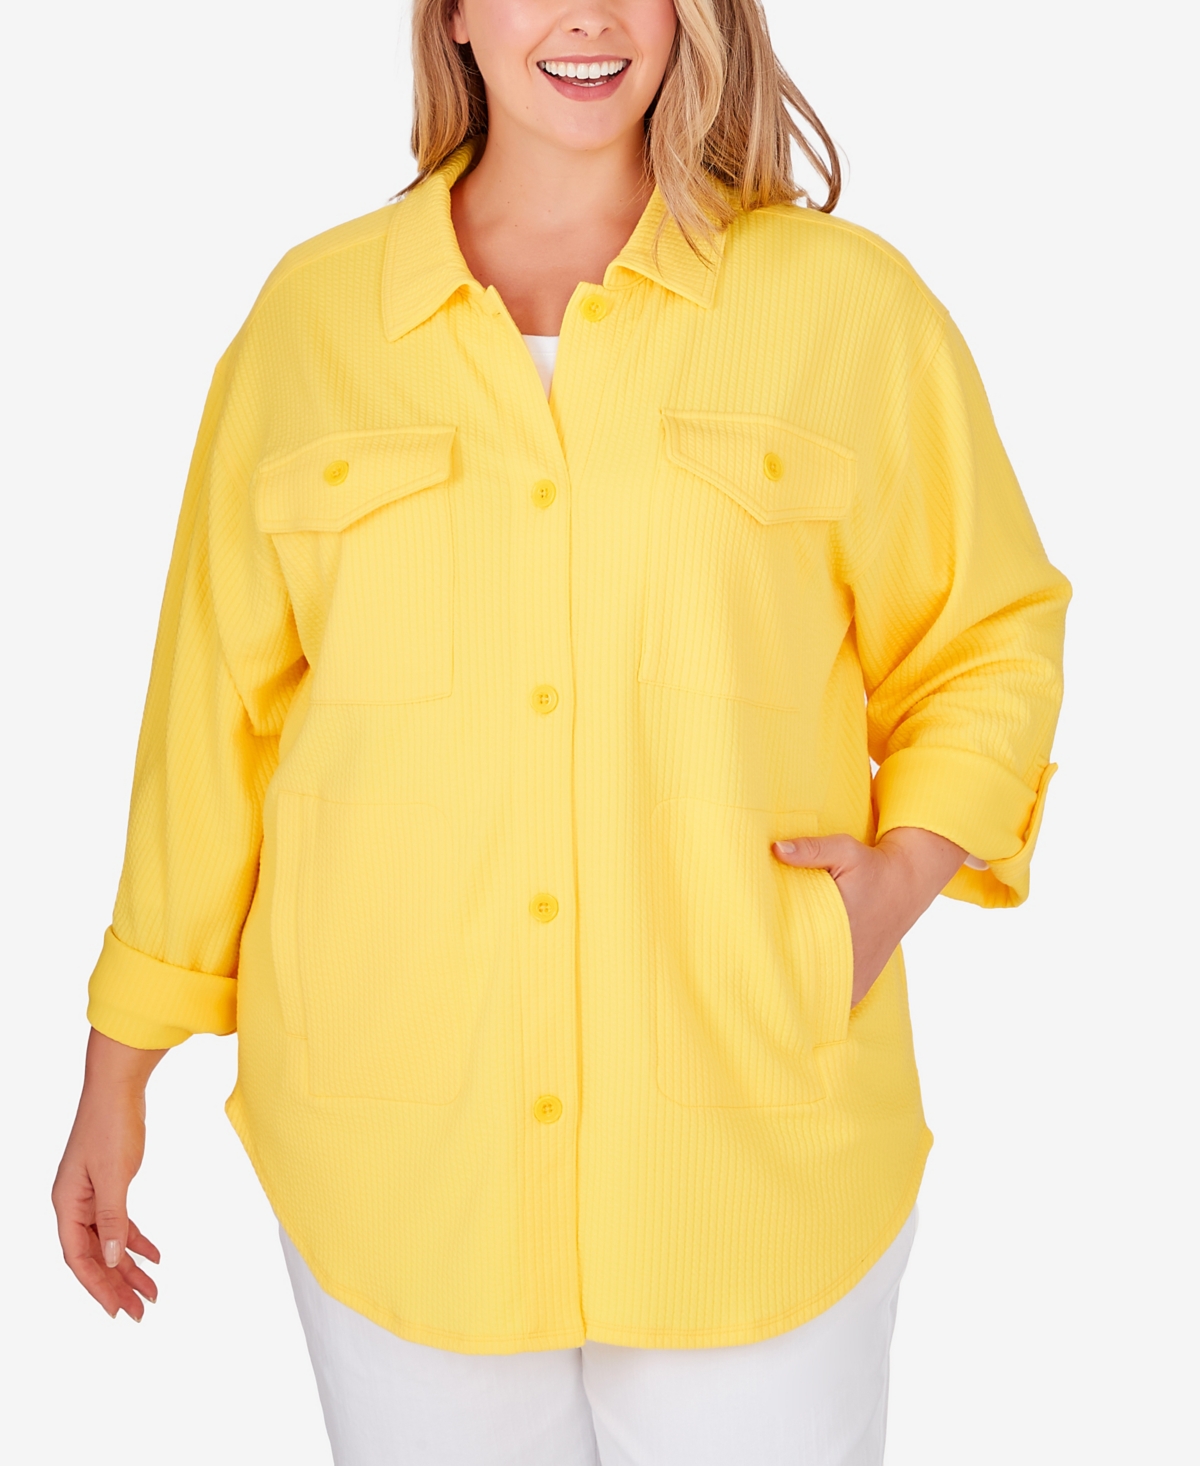 Ruby Rd. Plus Size Button Front Shirt Collar Textured Knit Jacket With Pockets In Sunburst